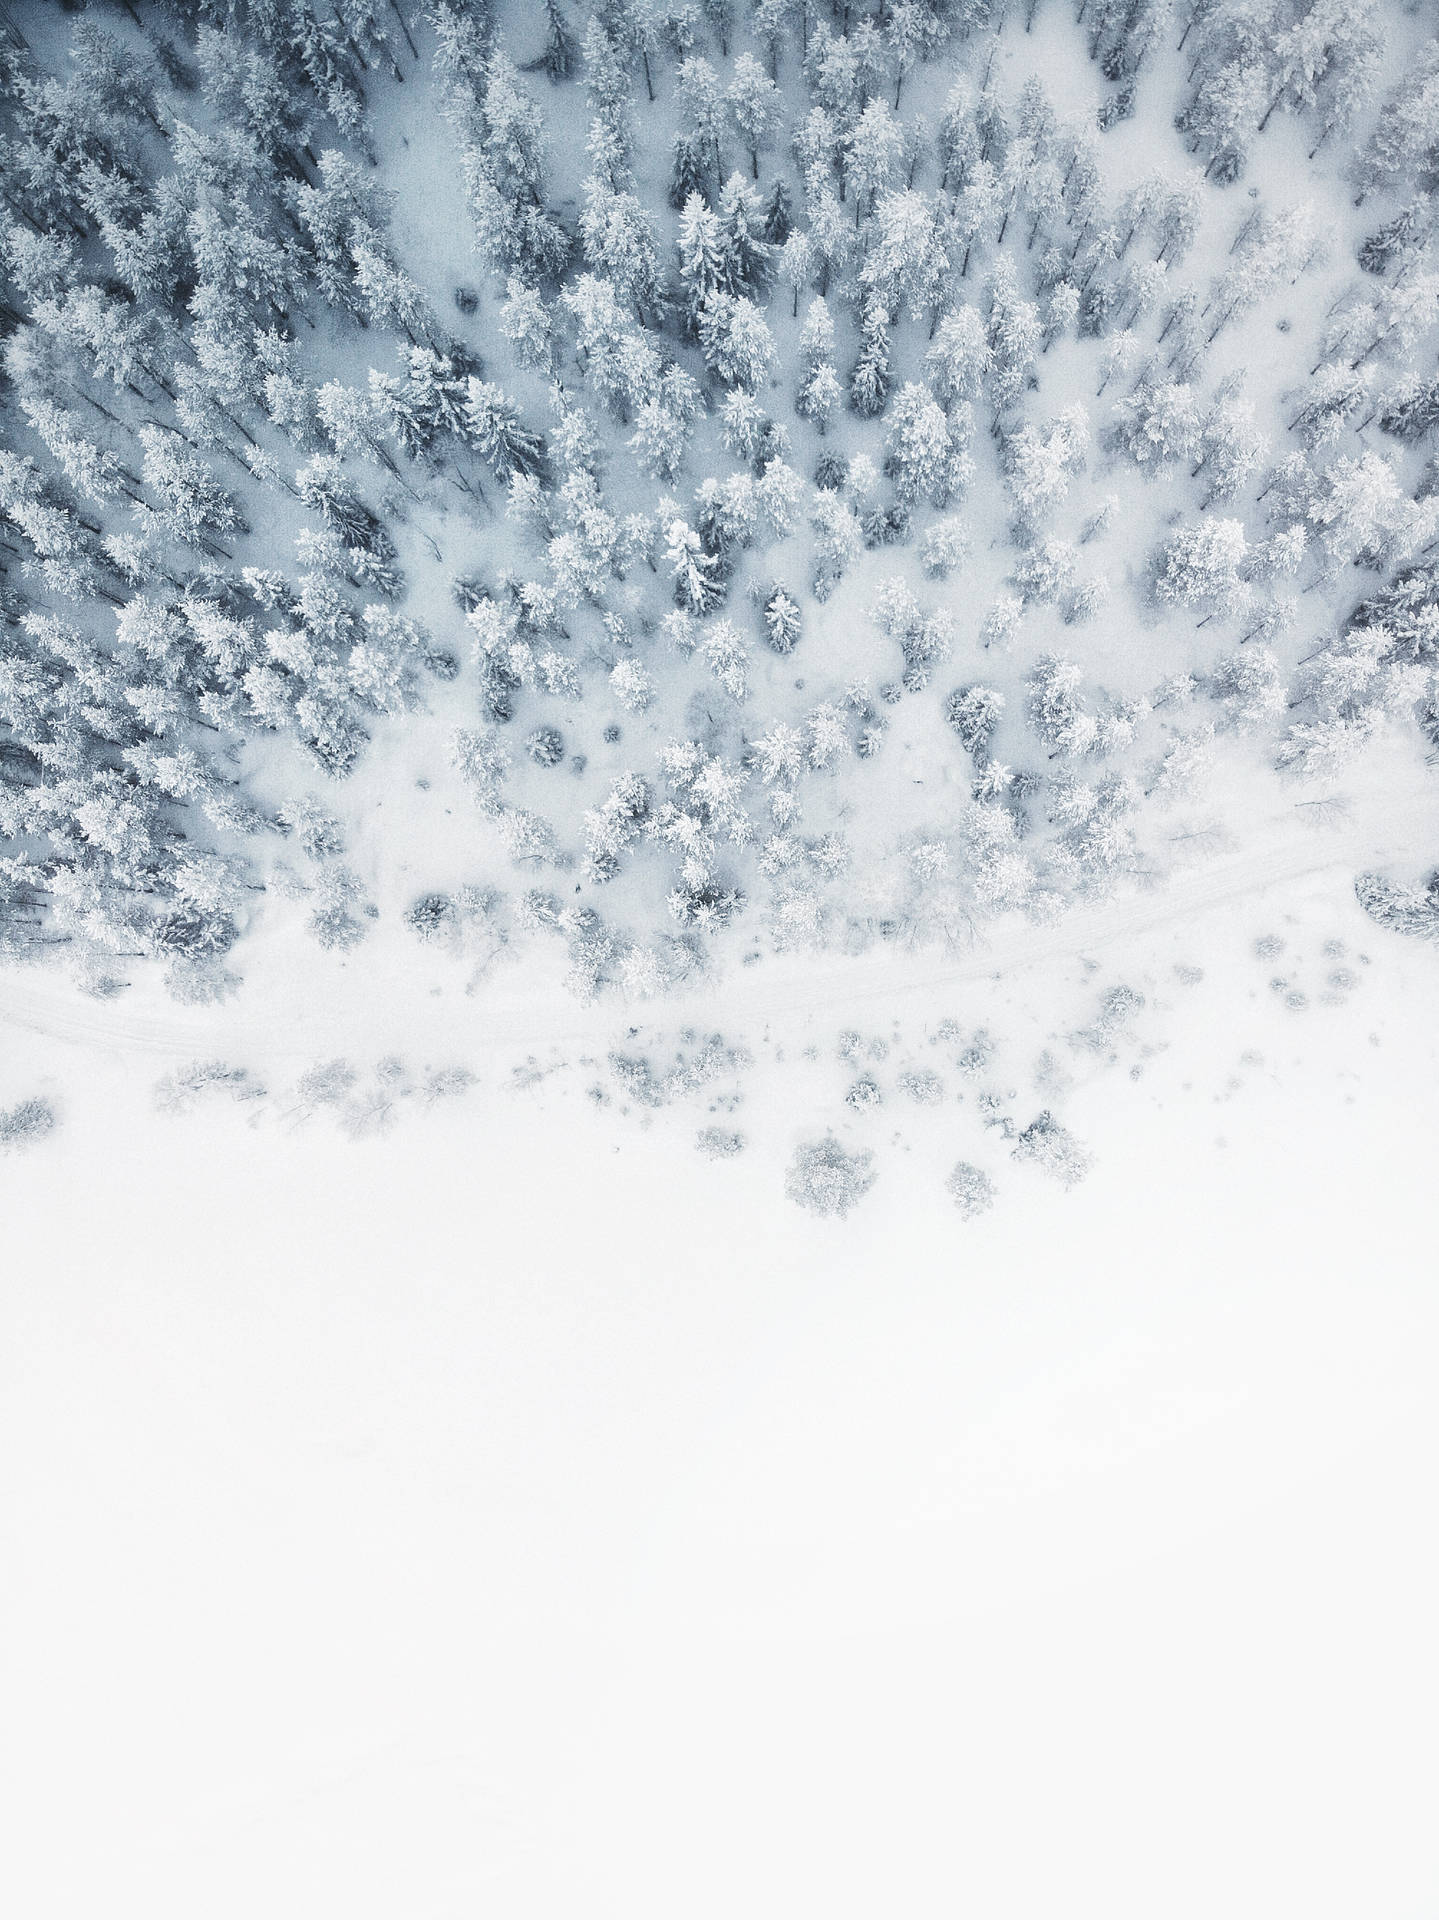 3040X4056 Snow Wallpaper and Background